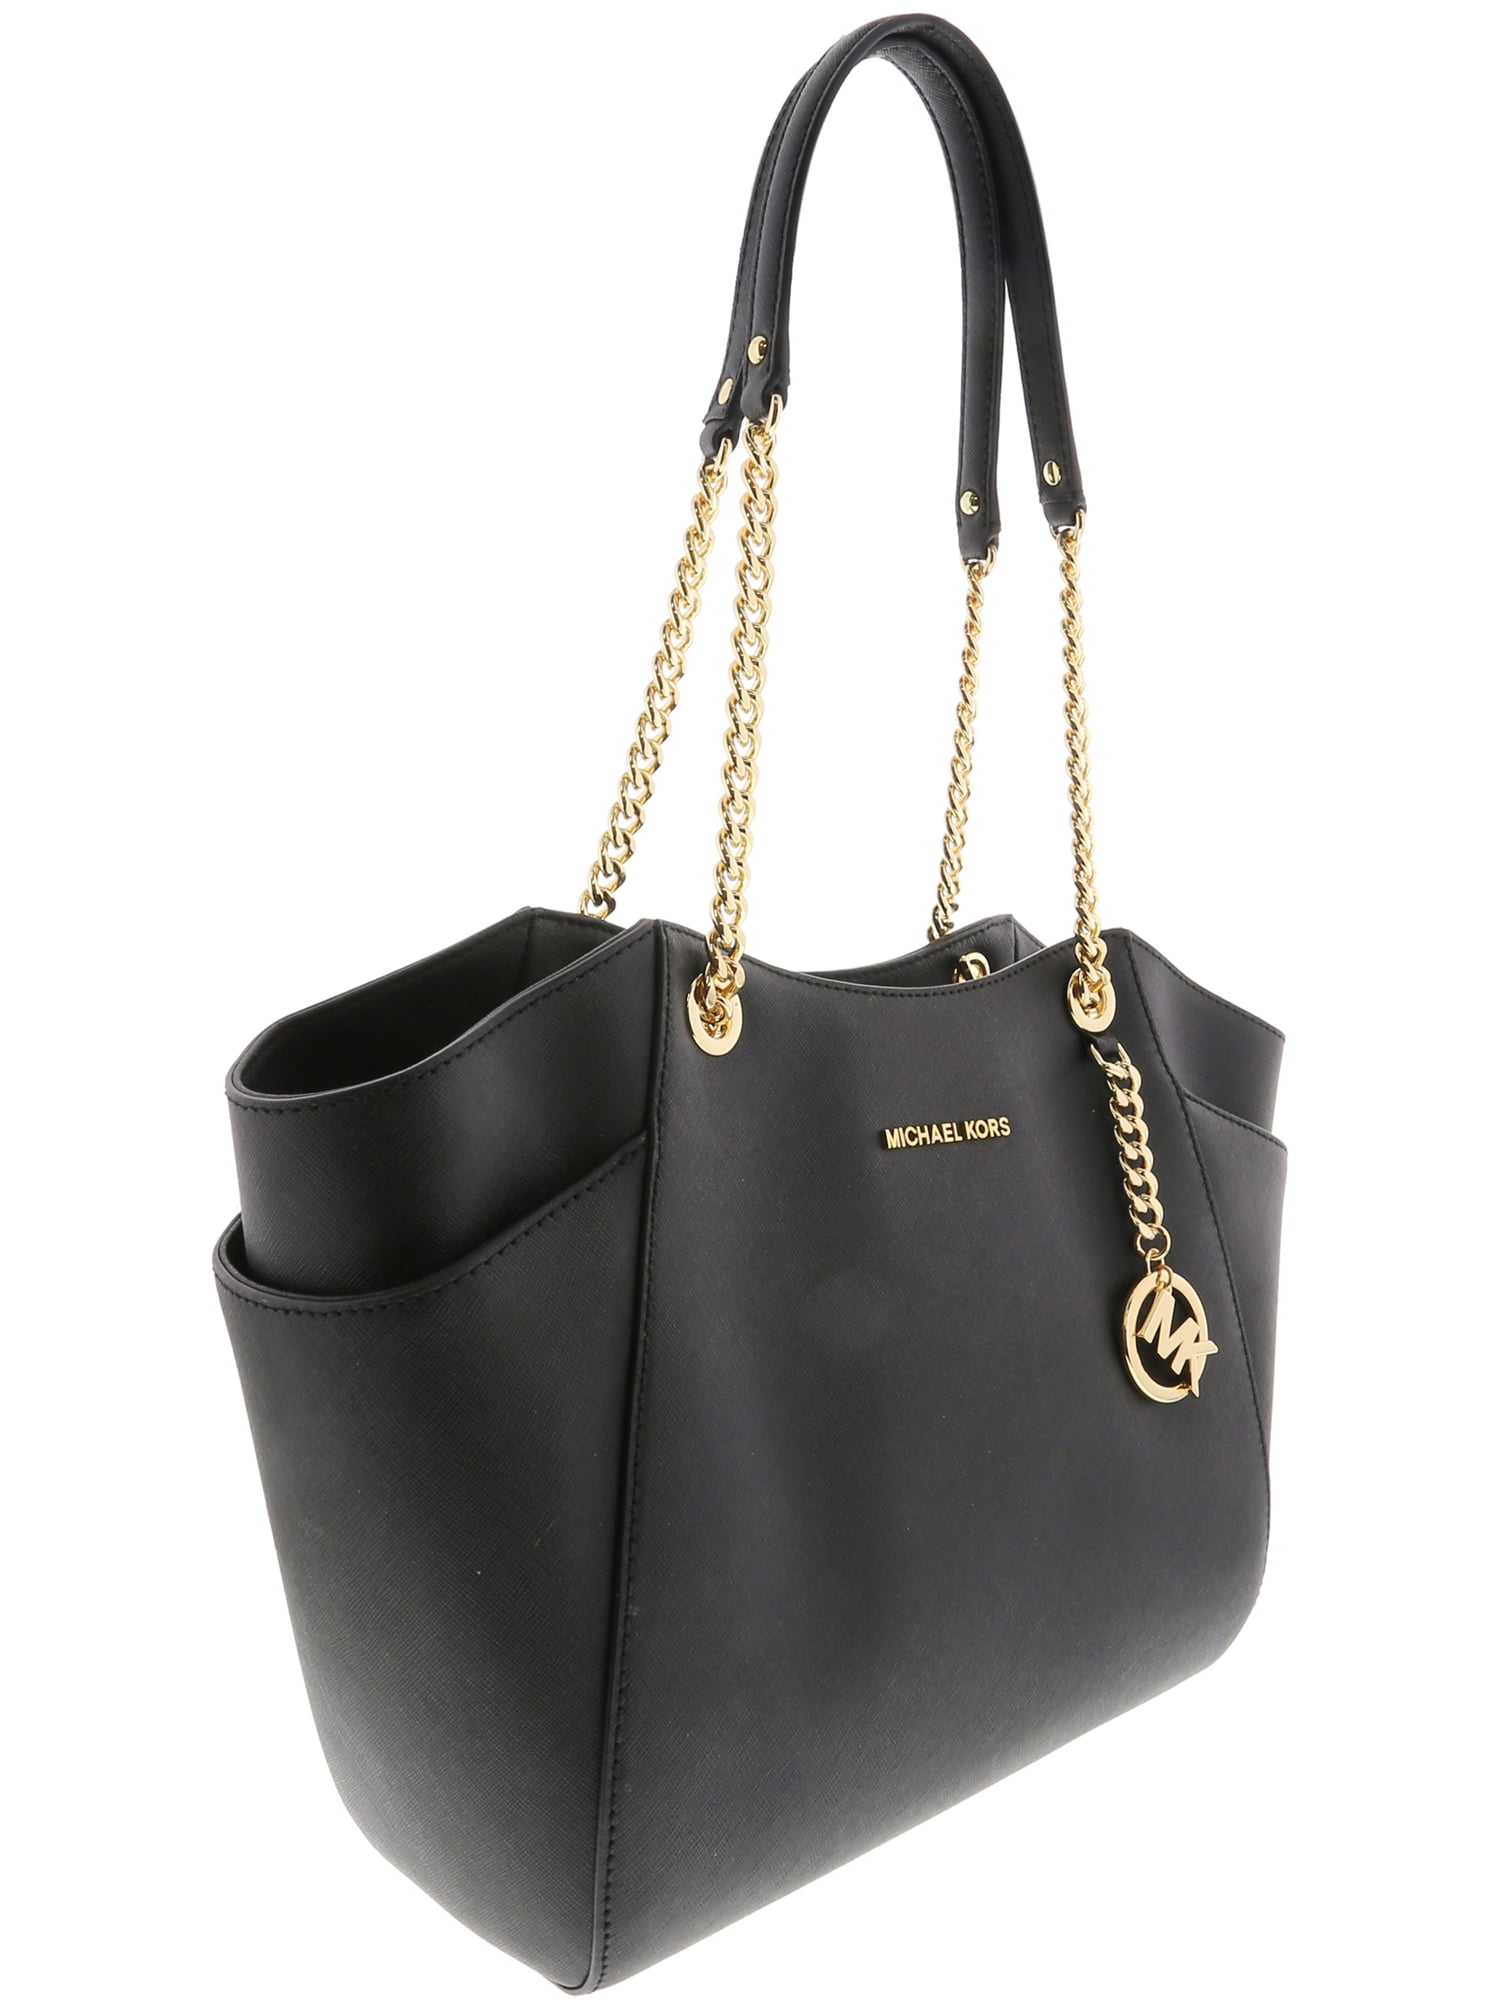 michael kors black with gold chain